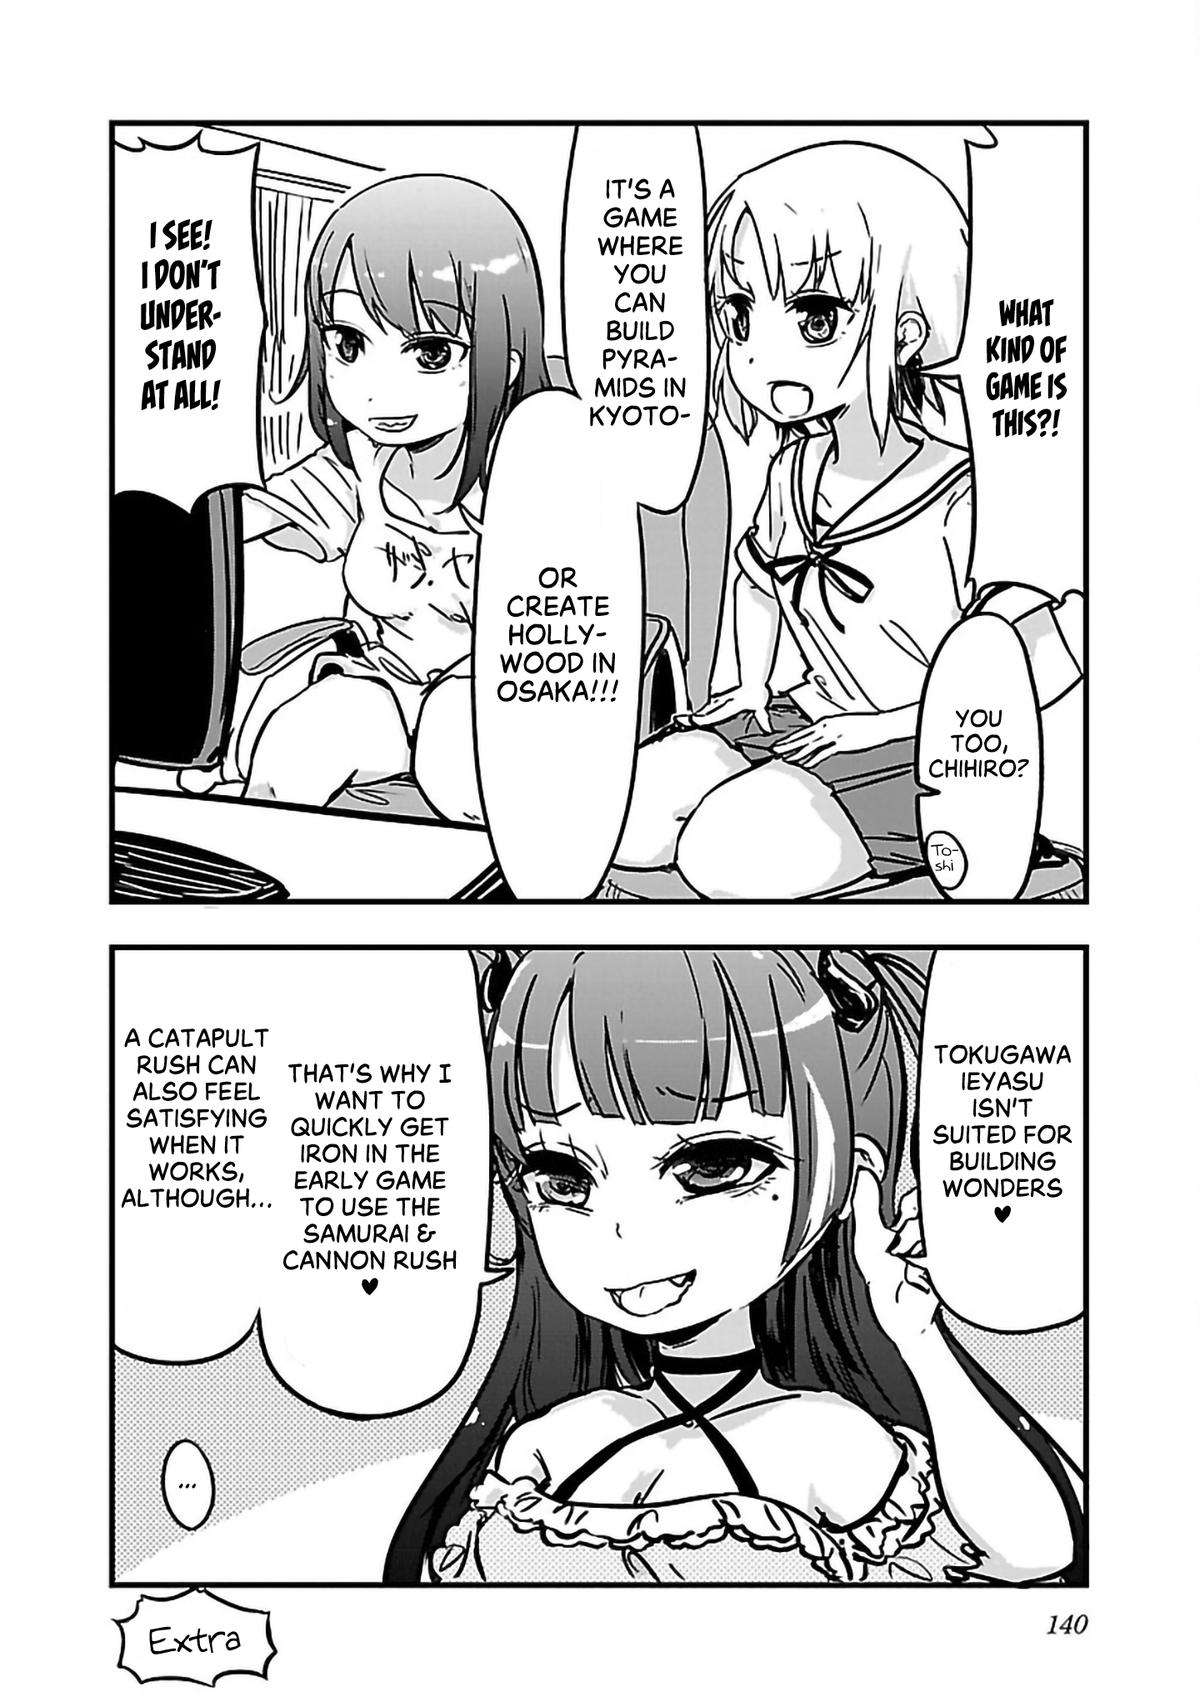 My Onee-chan's Personality Changes When She Plays Games - chapter 13.5 - #2